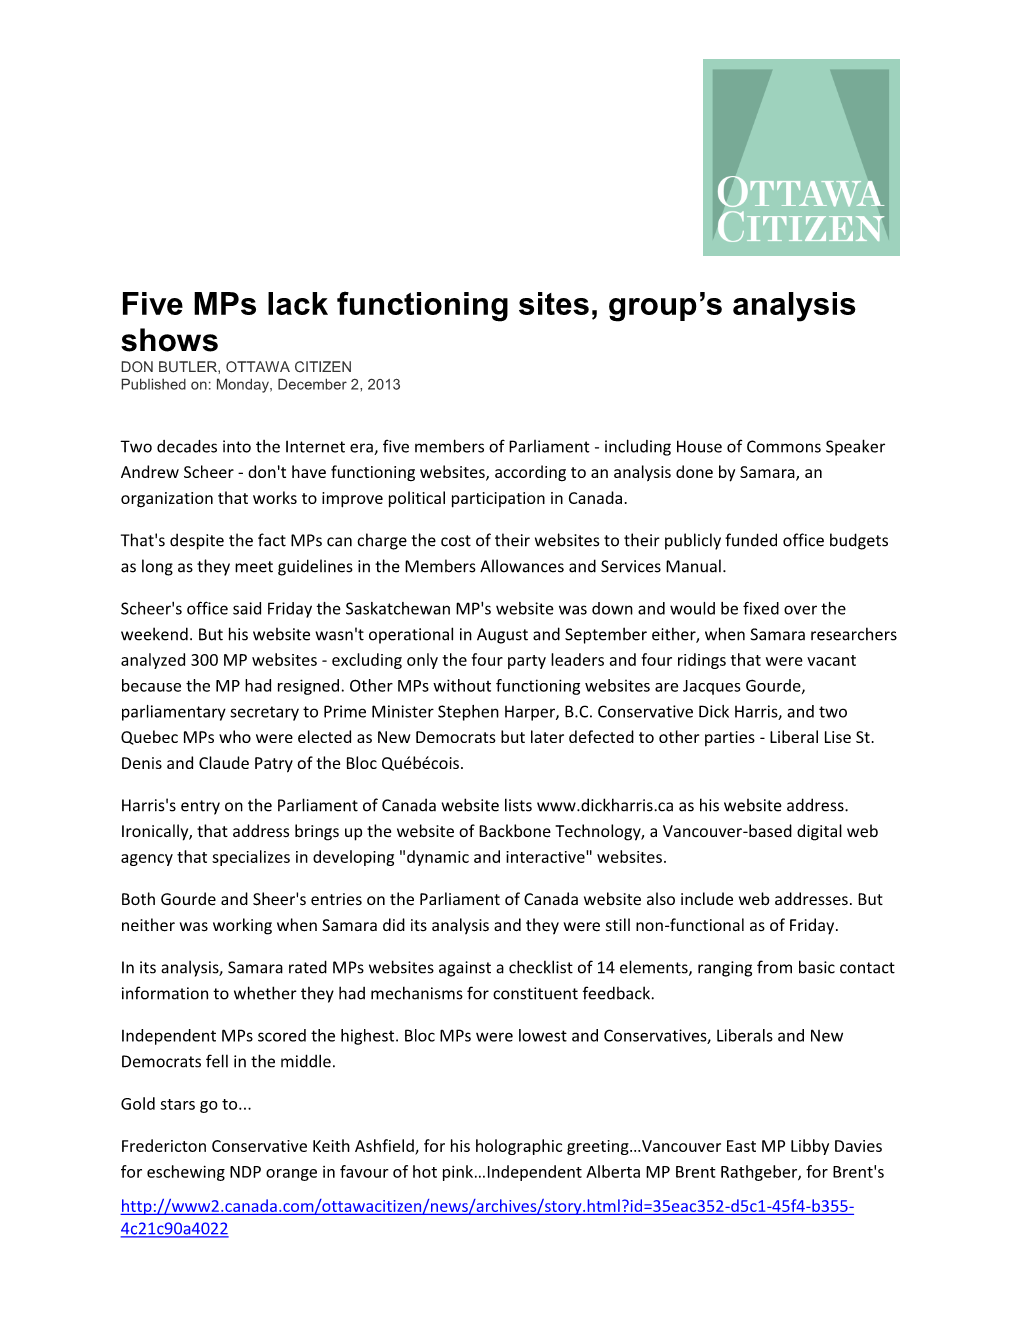 Five Mps Lack Functioning Sites, Group's Analysis Shows